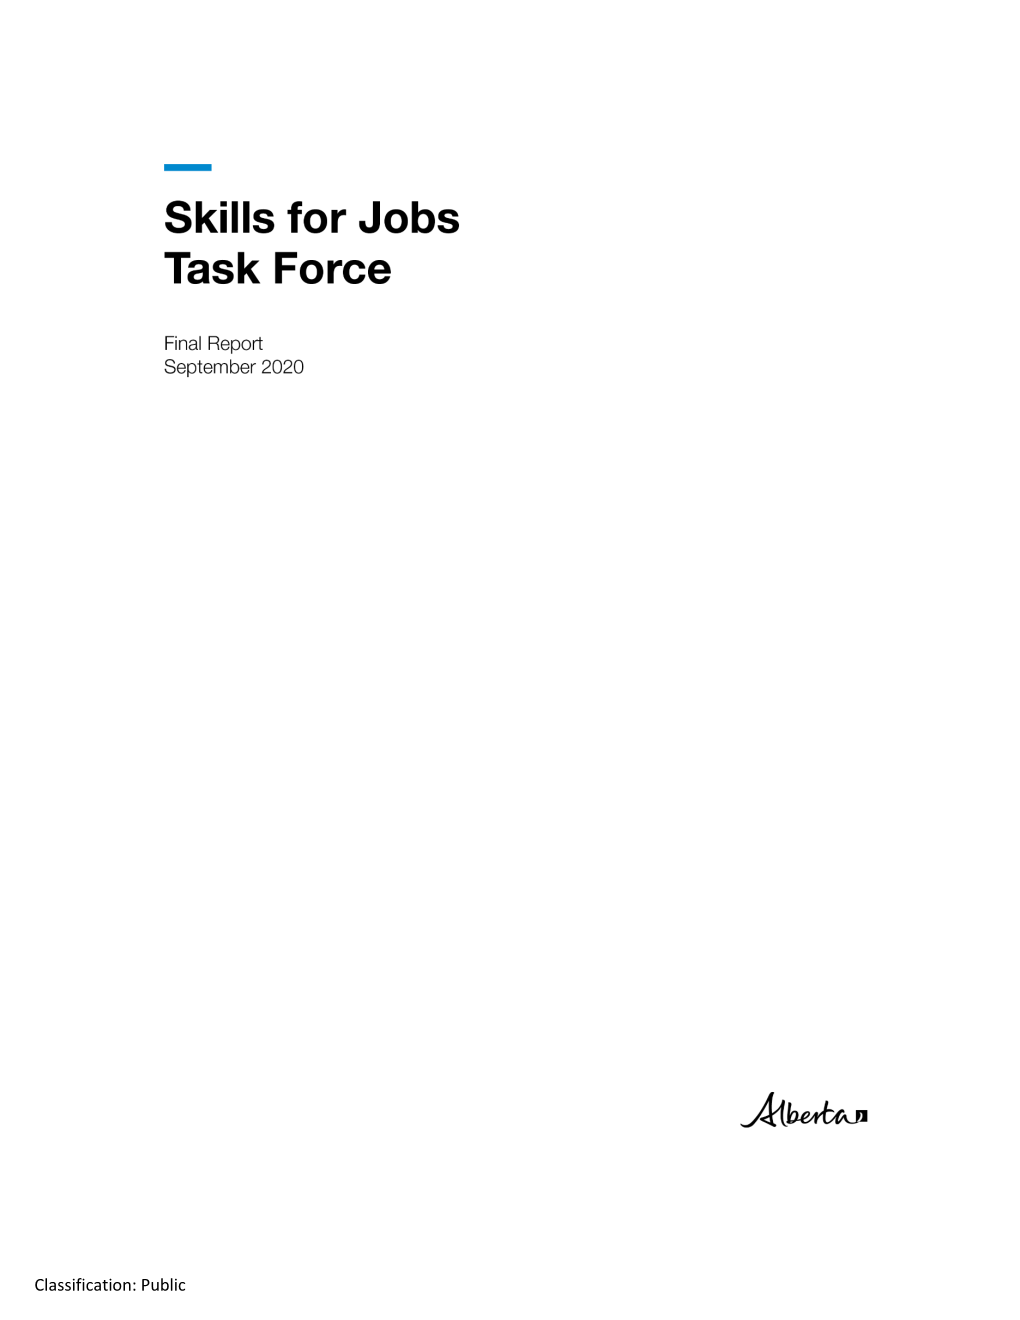 Skills for Jobs Task Force Final Report | Advanced Education © 2020 Government of Alberta | ISBN 978-1-4601-4970-6